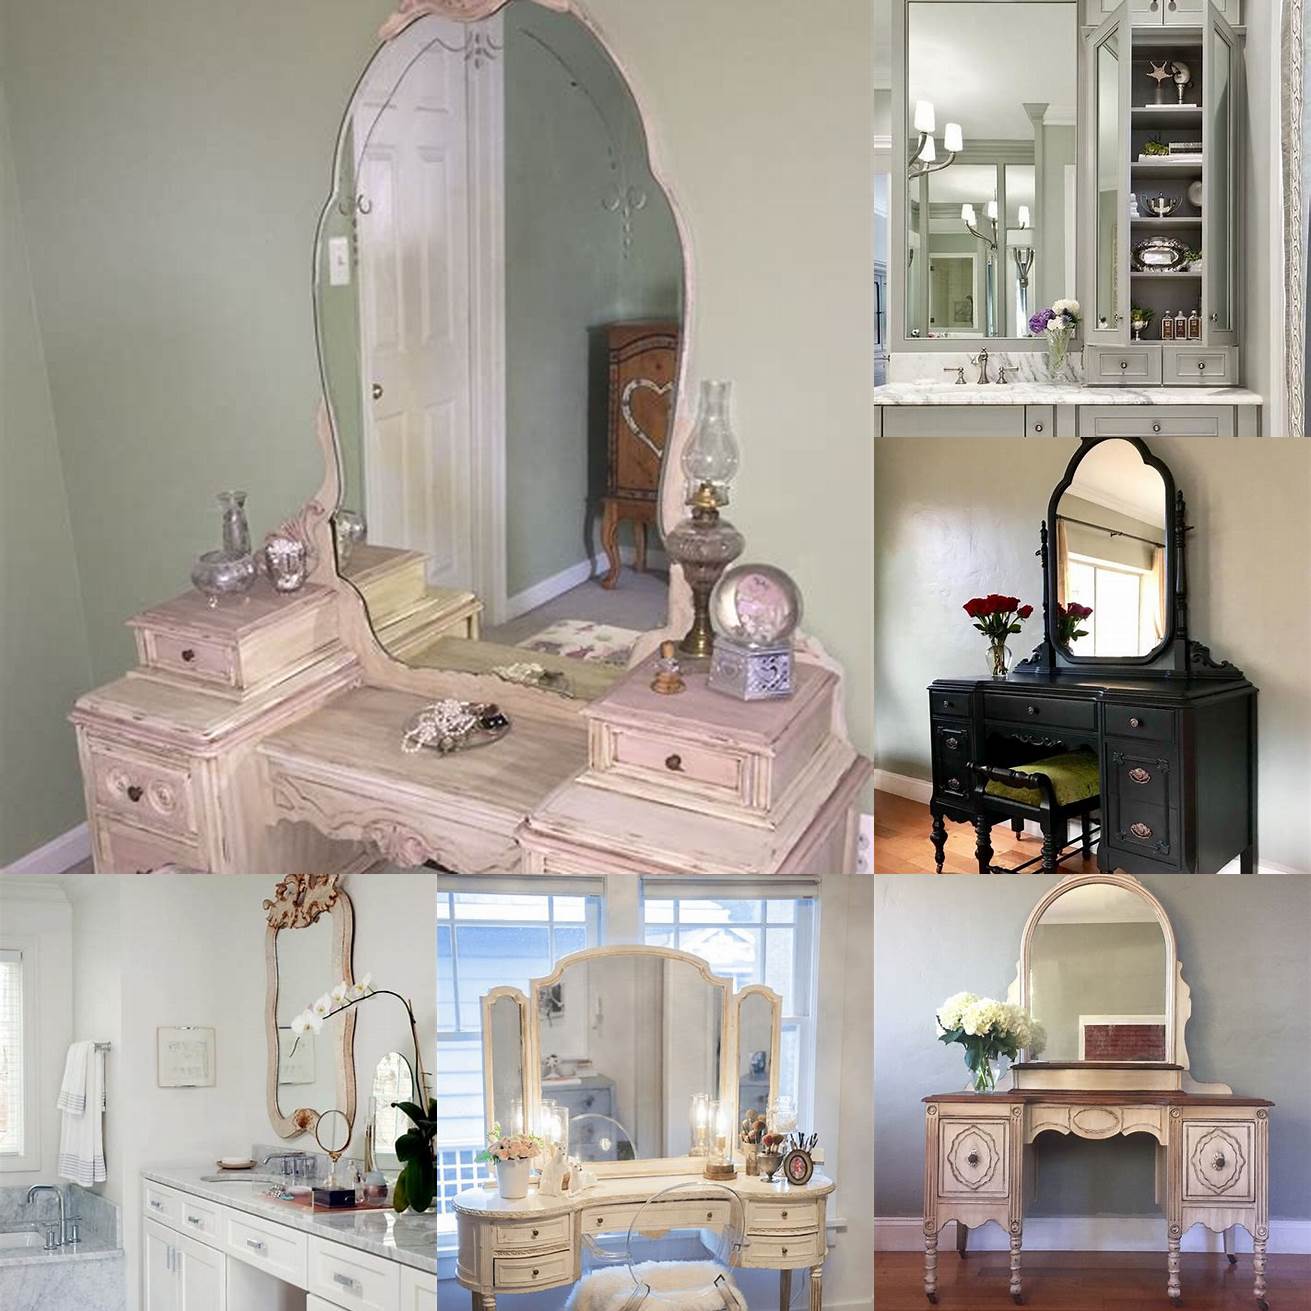 A vintage bathroom vanity with makeup station and a floral mirror frame